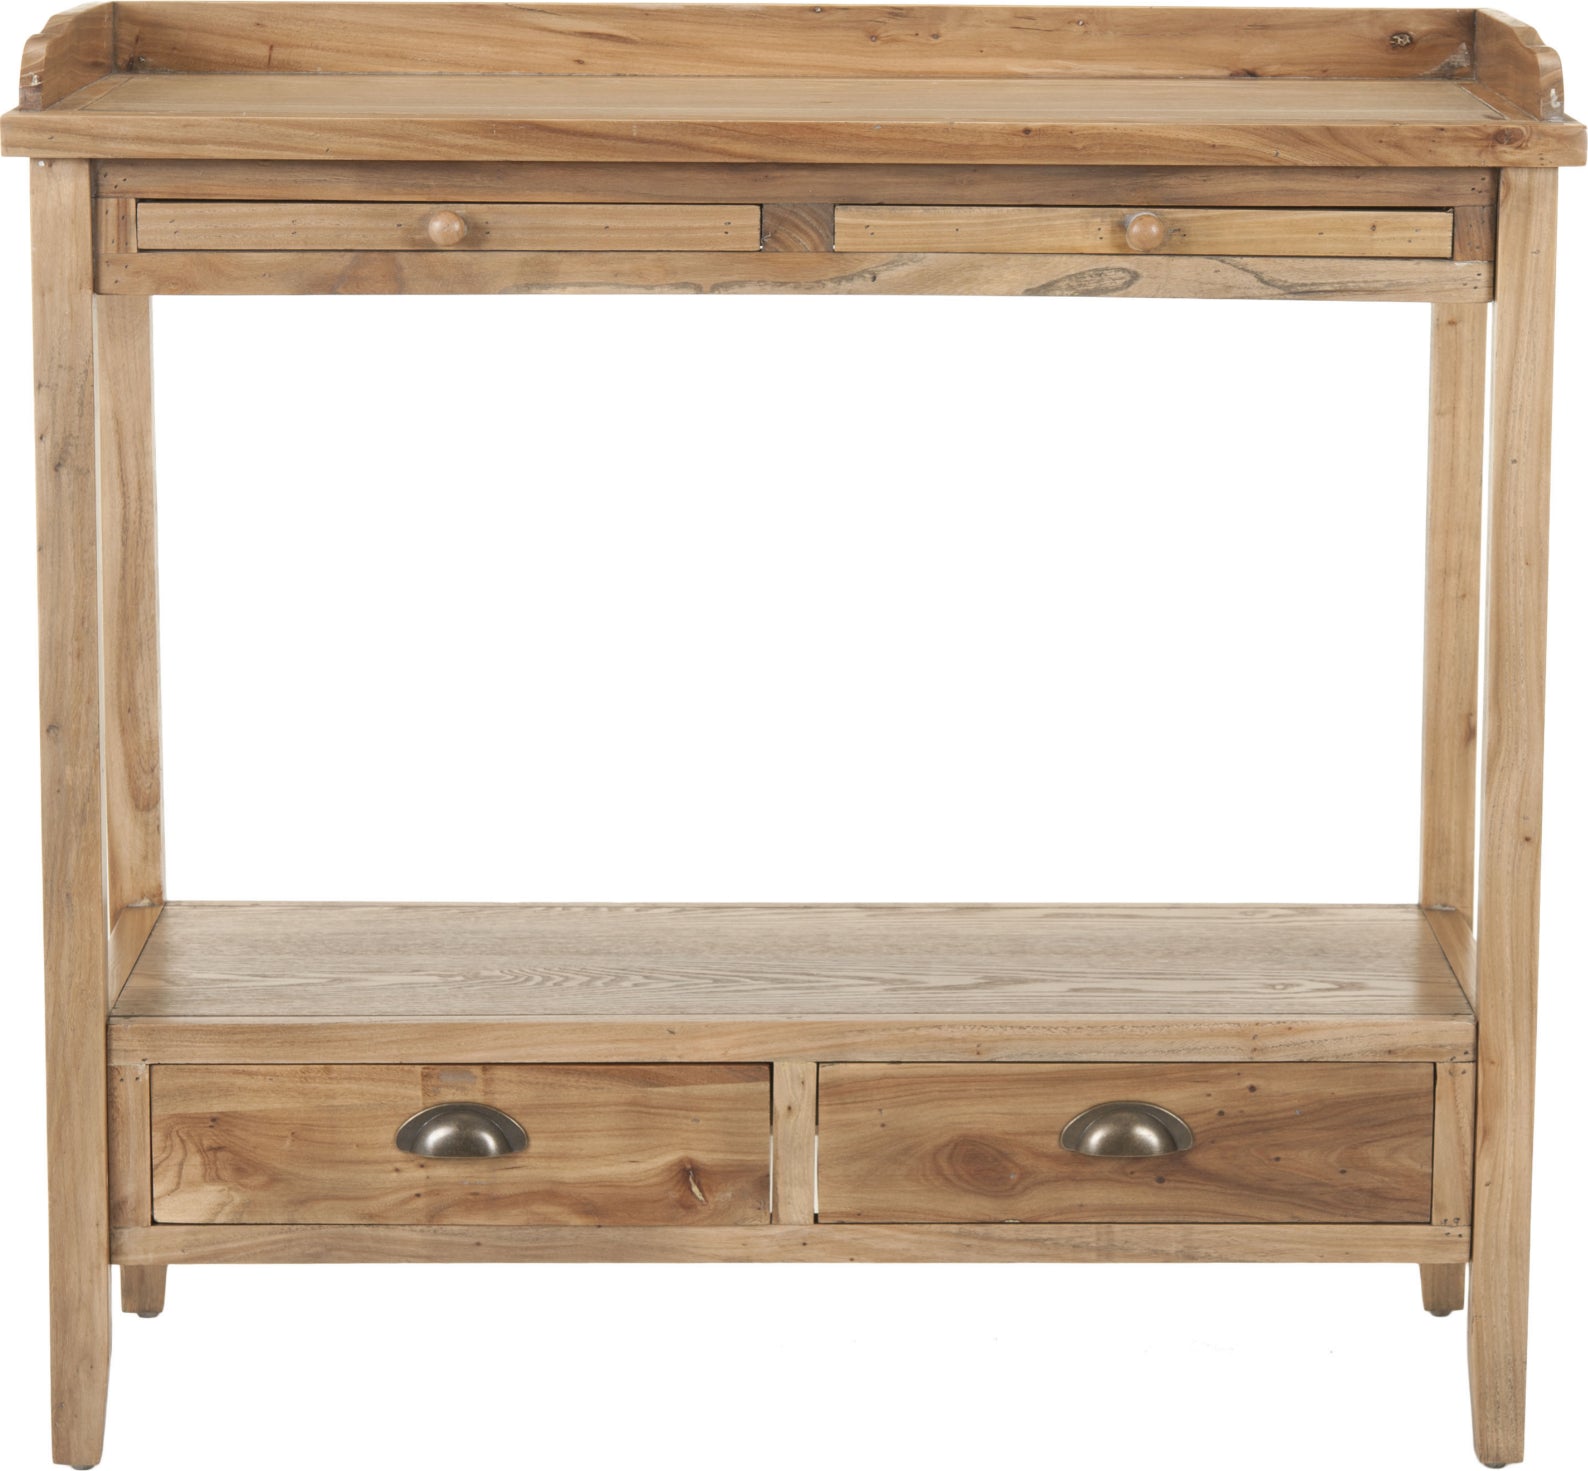 Safavieh Peter Console With Storage Drawers Oak Furniture main image